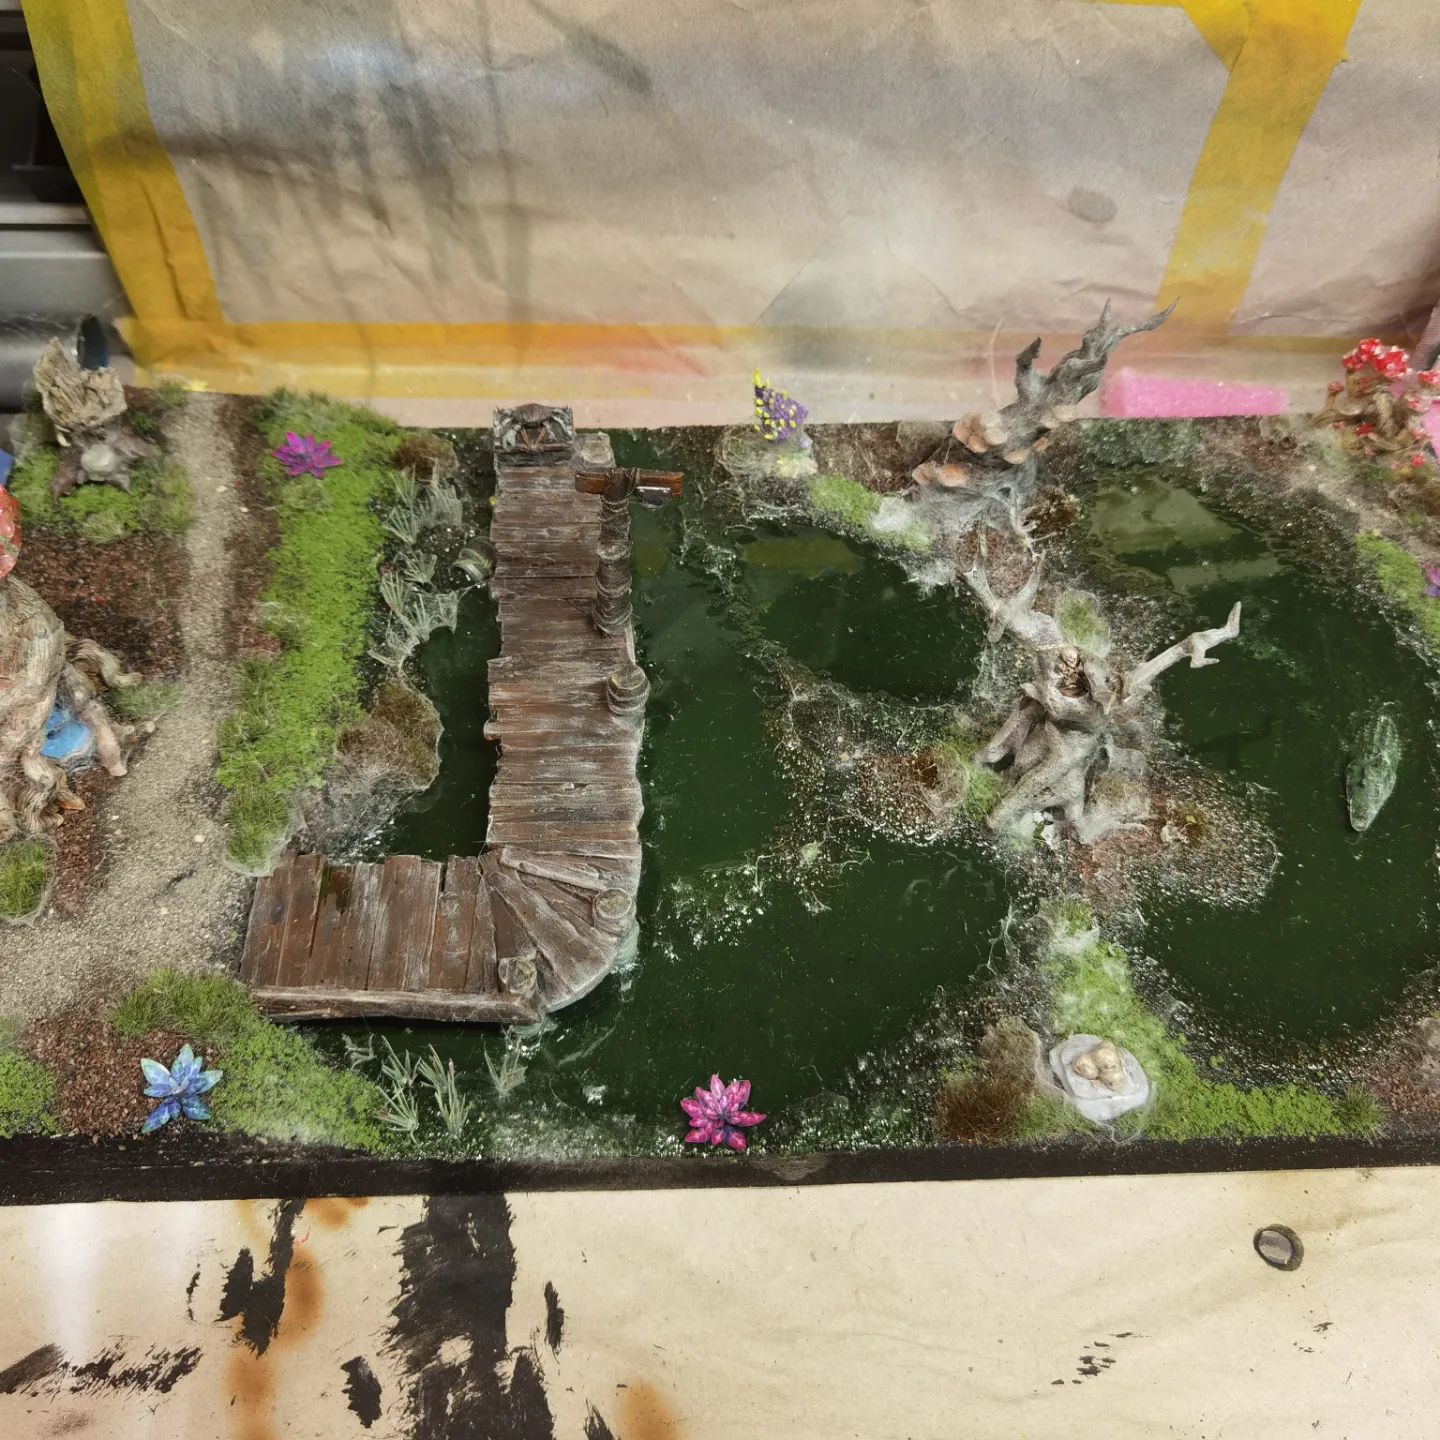 Fantasy swampdiorama, with spiderweb everywhere... sculpted Hartfoam base with 3d Printed and painted trees, mushrooms etc. 3d Files from @loot.studios 
Maybe i will add 2 fighting magicans  #lootstudios #swamp #sumpf #diorama #diy #airbrush #3dprint #uvresin #slaprint #hartfoam #fantasy #phantasyart #deadtree #mushrooms #magic #art #kunst #modellbau #skullz #spiderserum #spiderweb #magicworld #swamplife